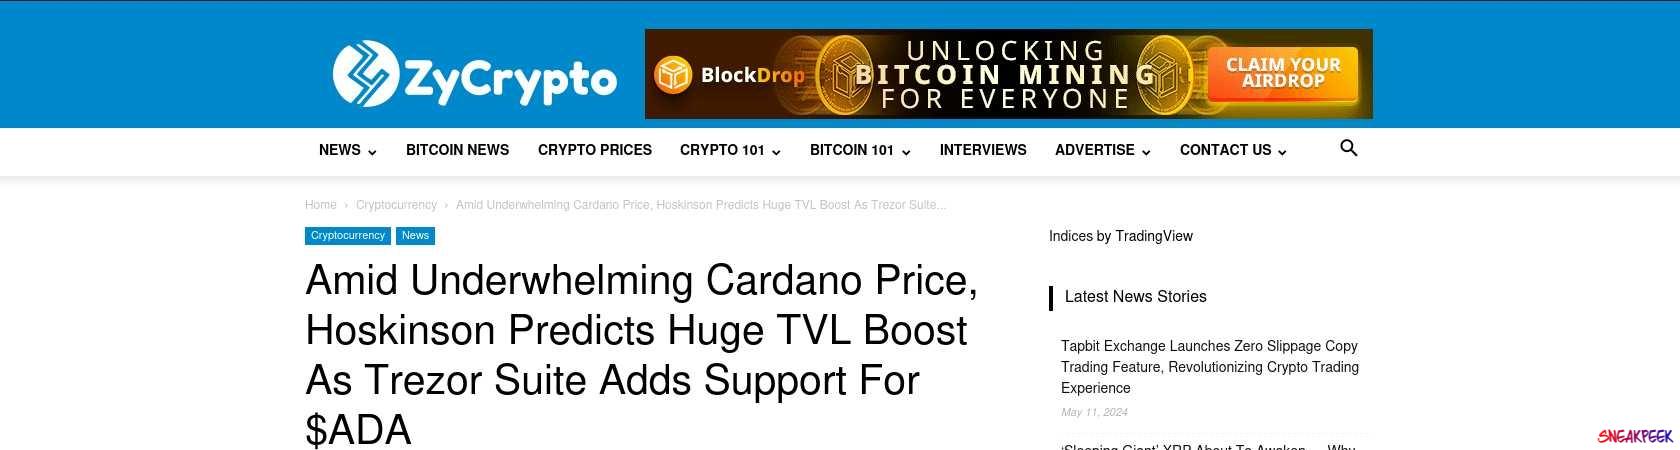 Read the full Article:  ⭲ Amid Underwhelming Cardano Price, Hoskinson Predicts Huge TVL Boost As Trezor Suite Adds Support For $ADA